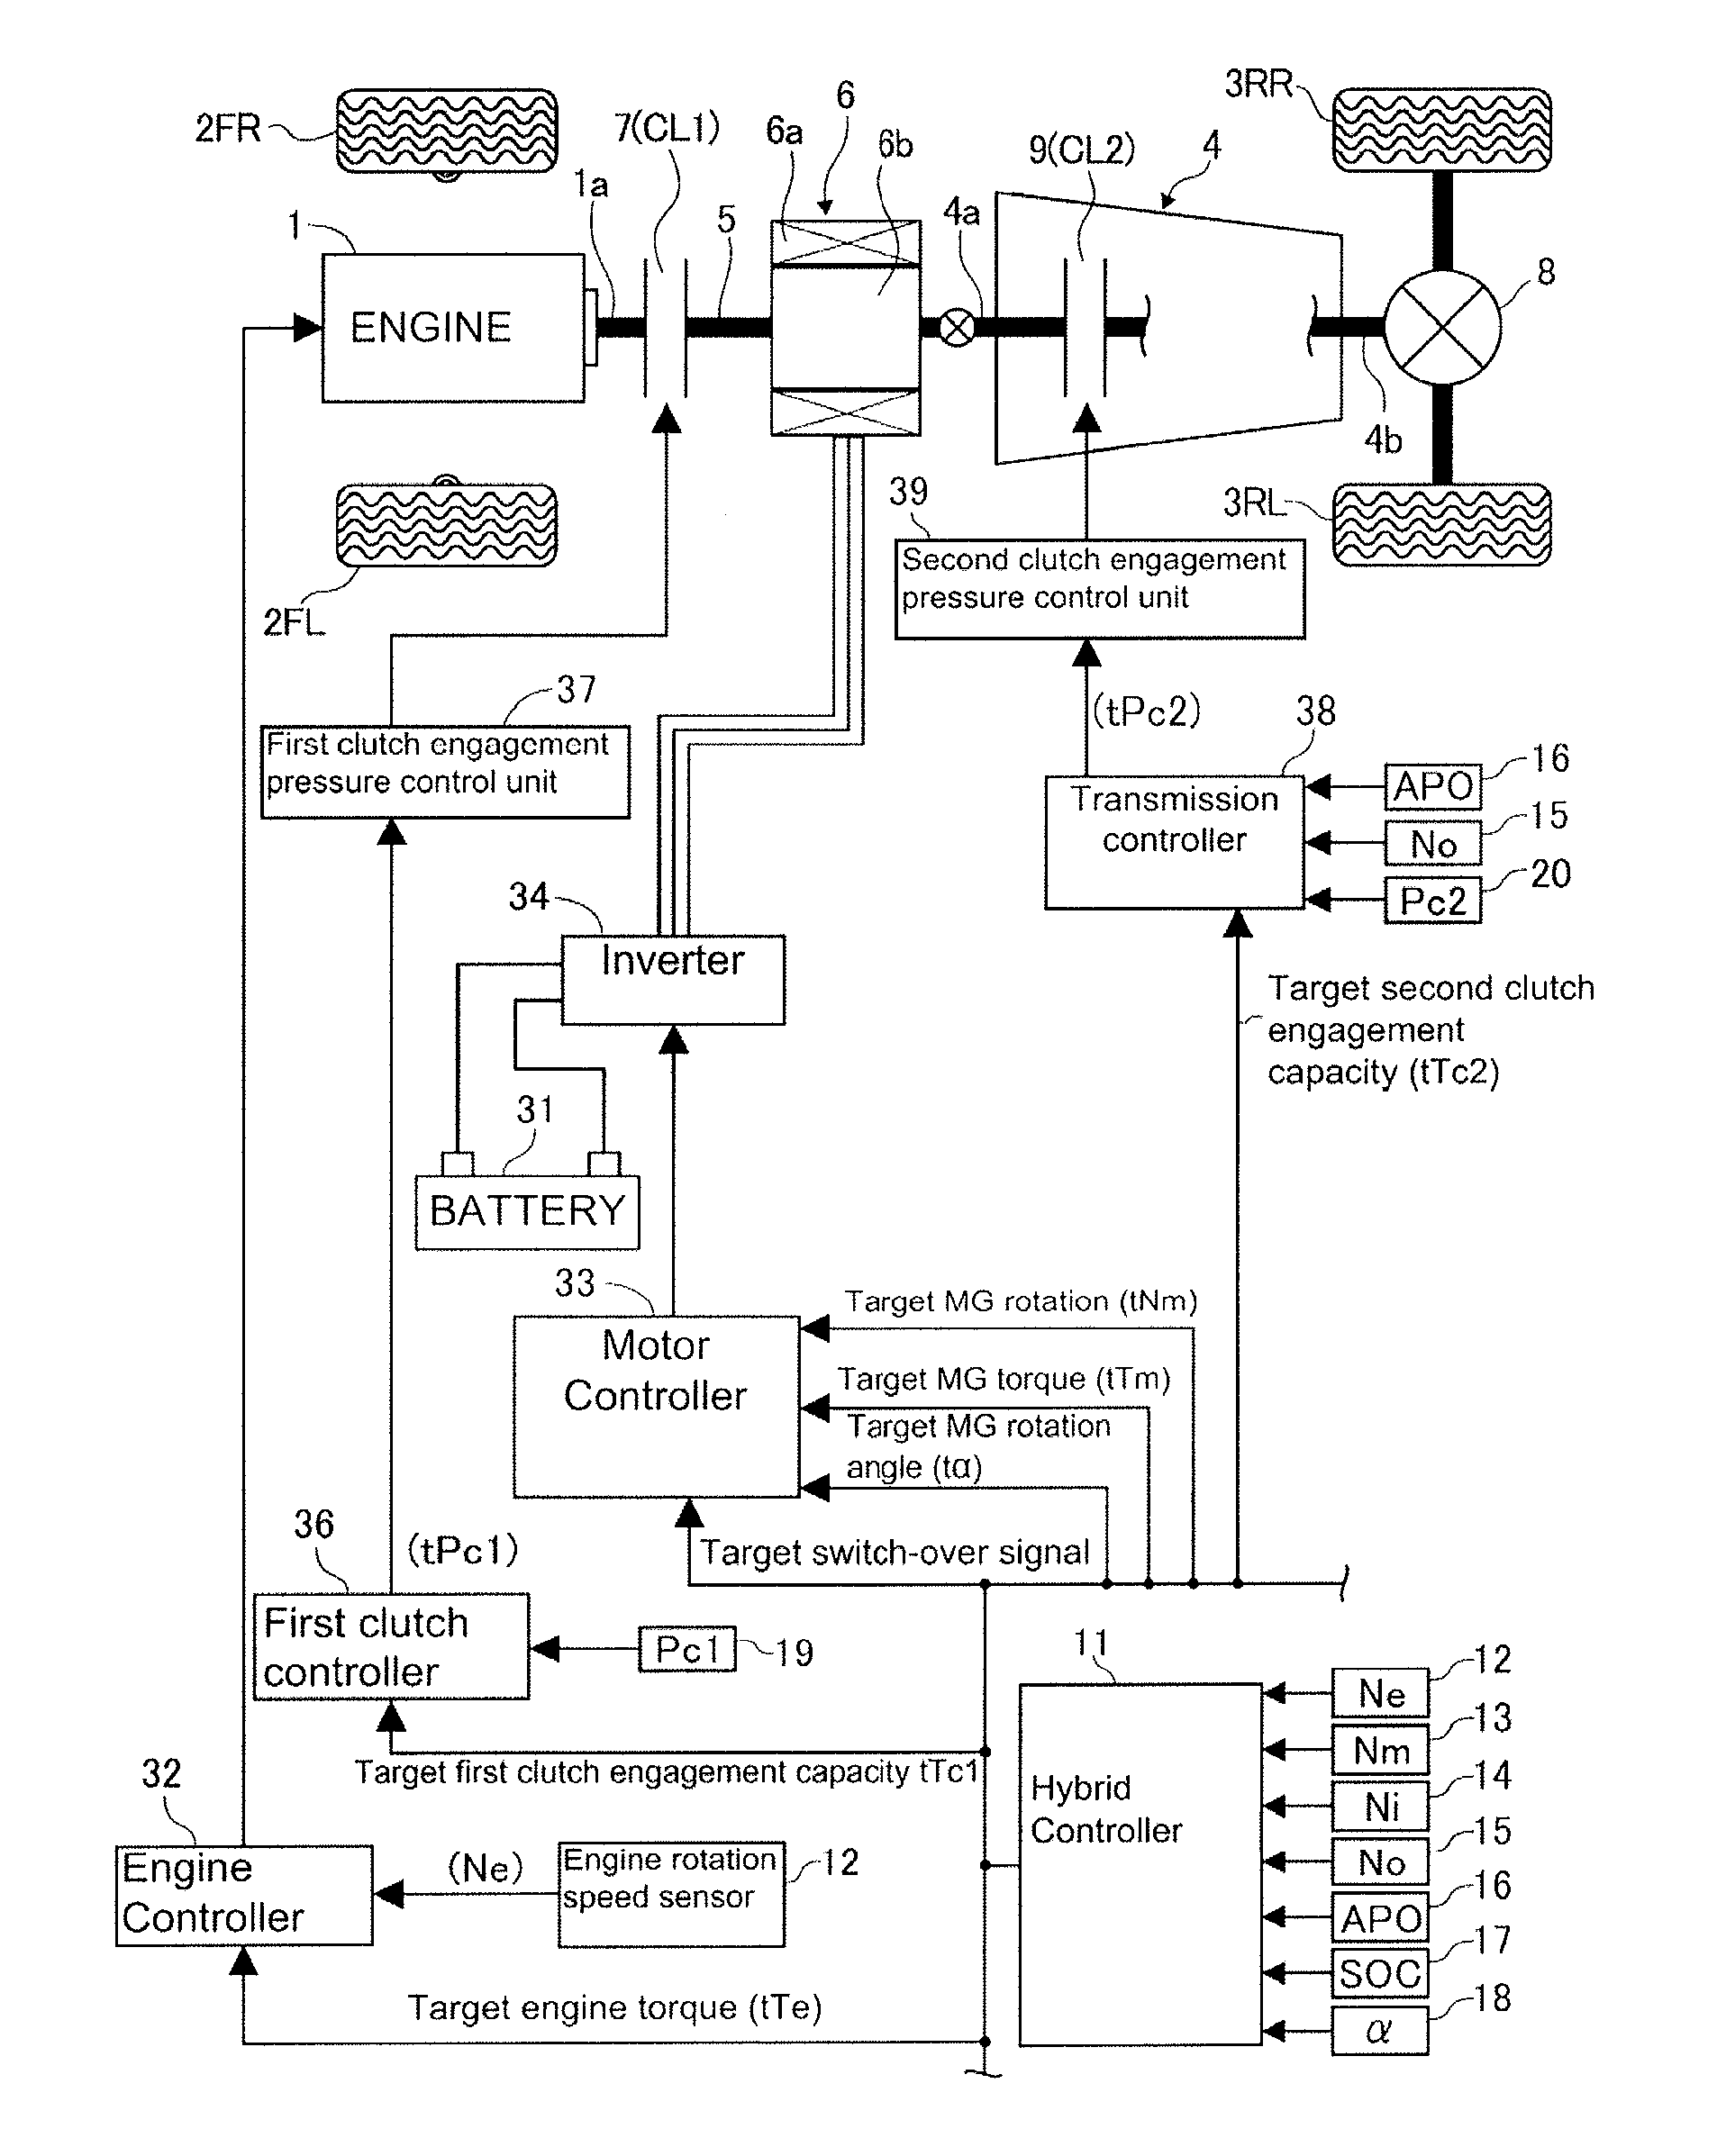 Engine stop control system for hybrid electric vehicle